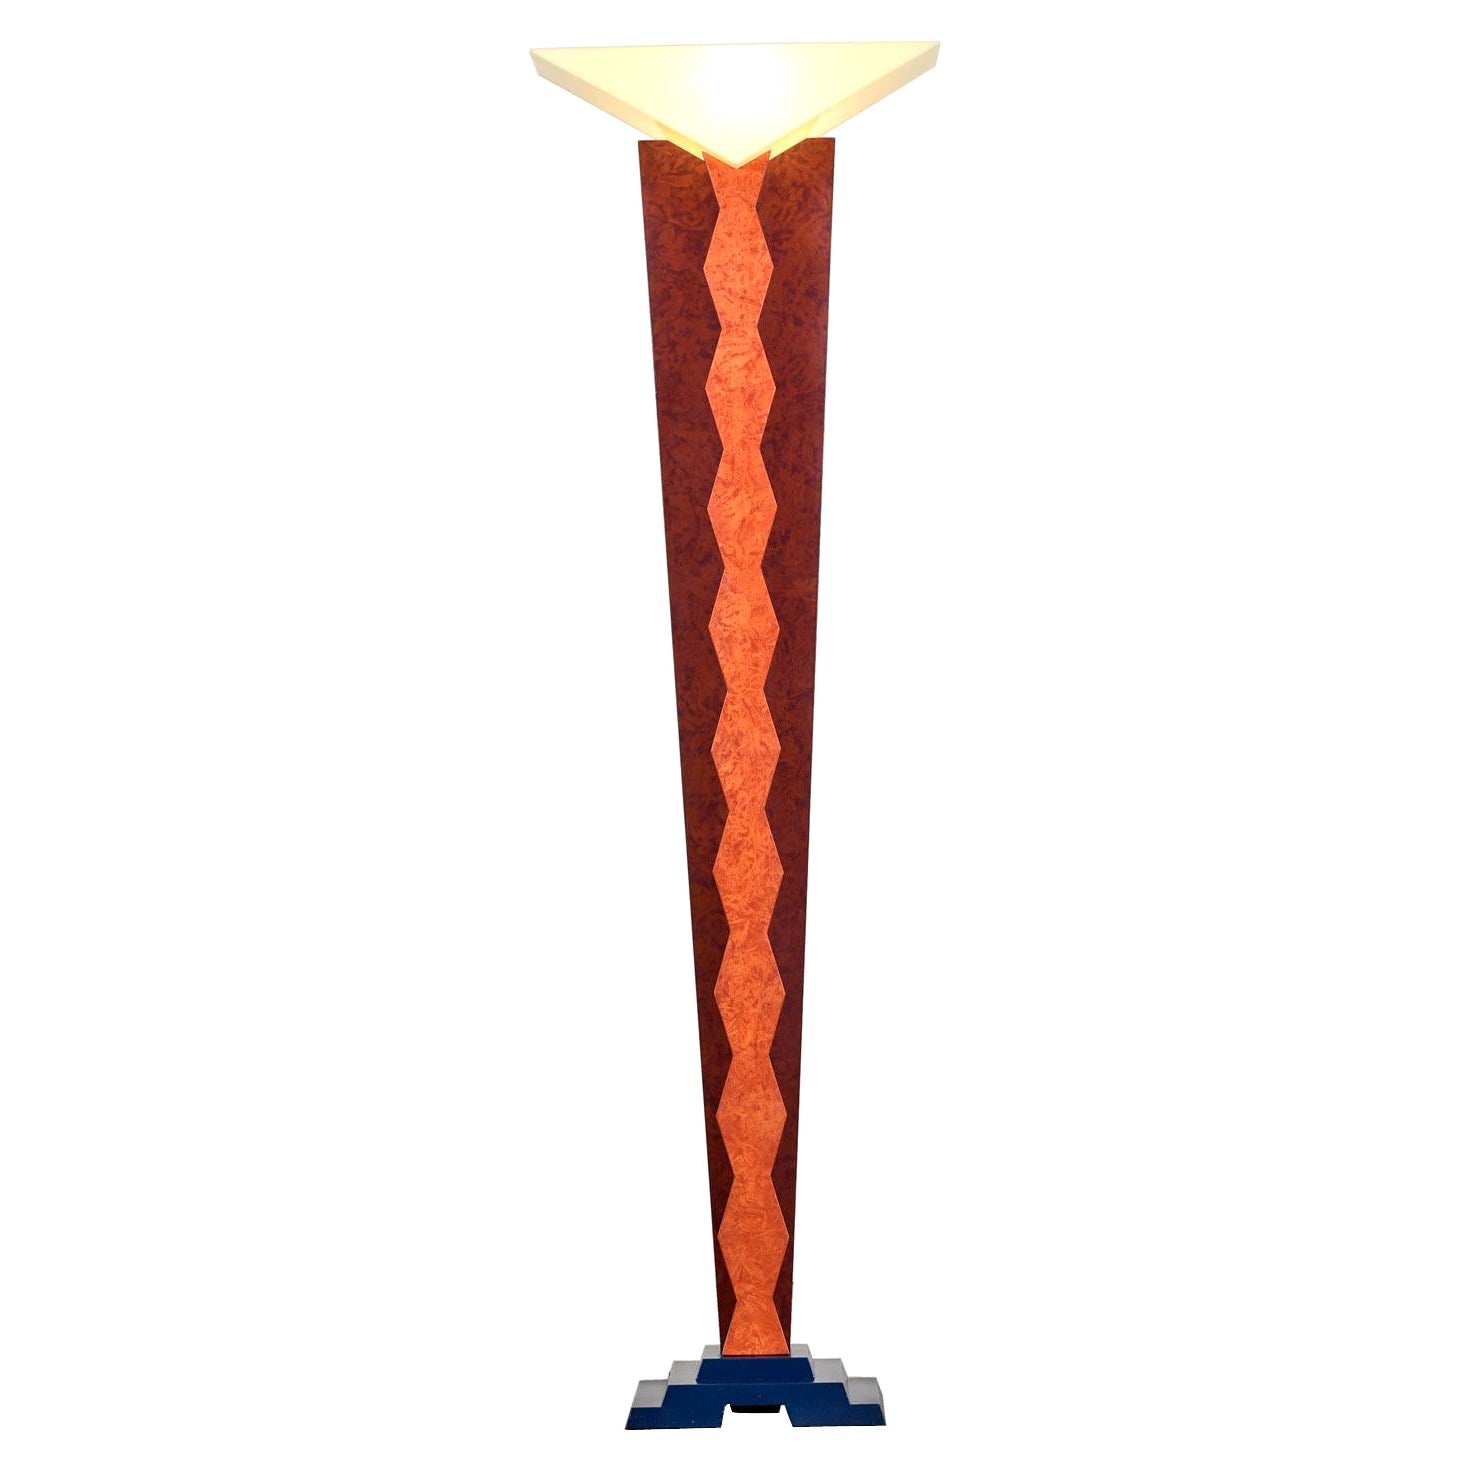 Sottsass Style Memphis Floor Lamp by Neophile Limited Edition Furniture 1988